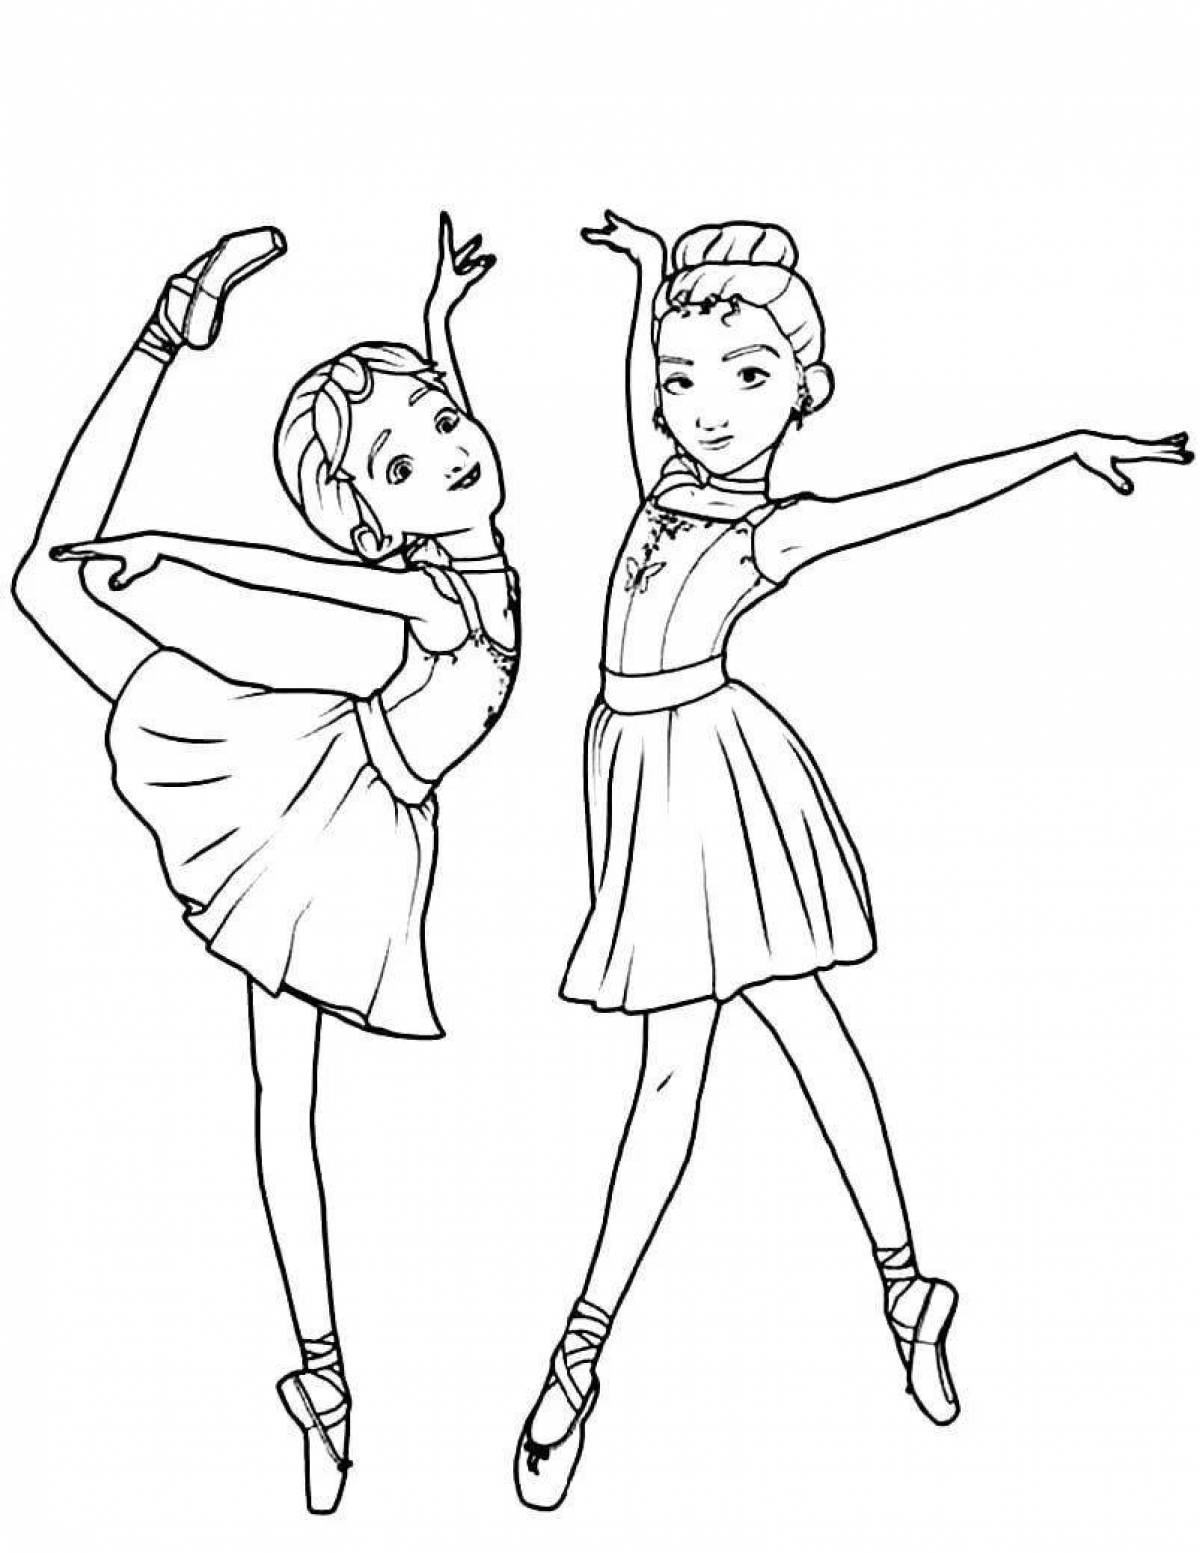 Coloring page playful ballerina